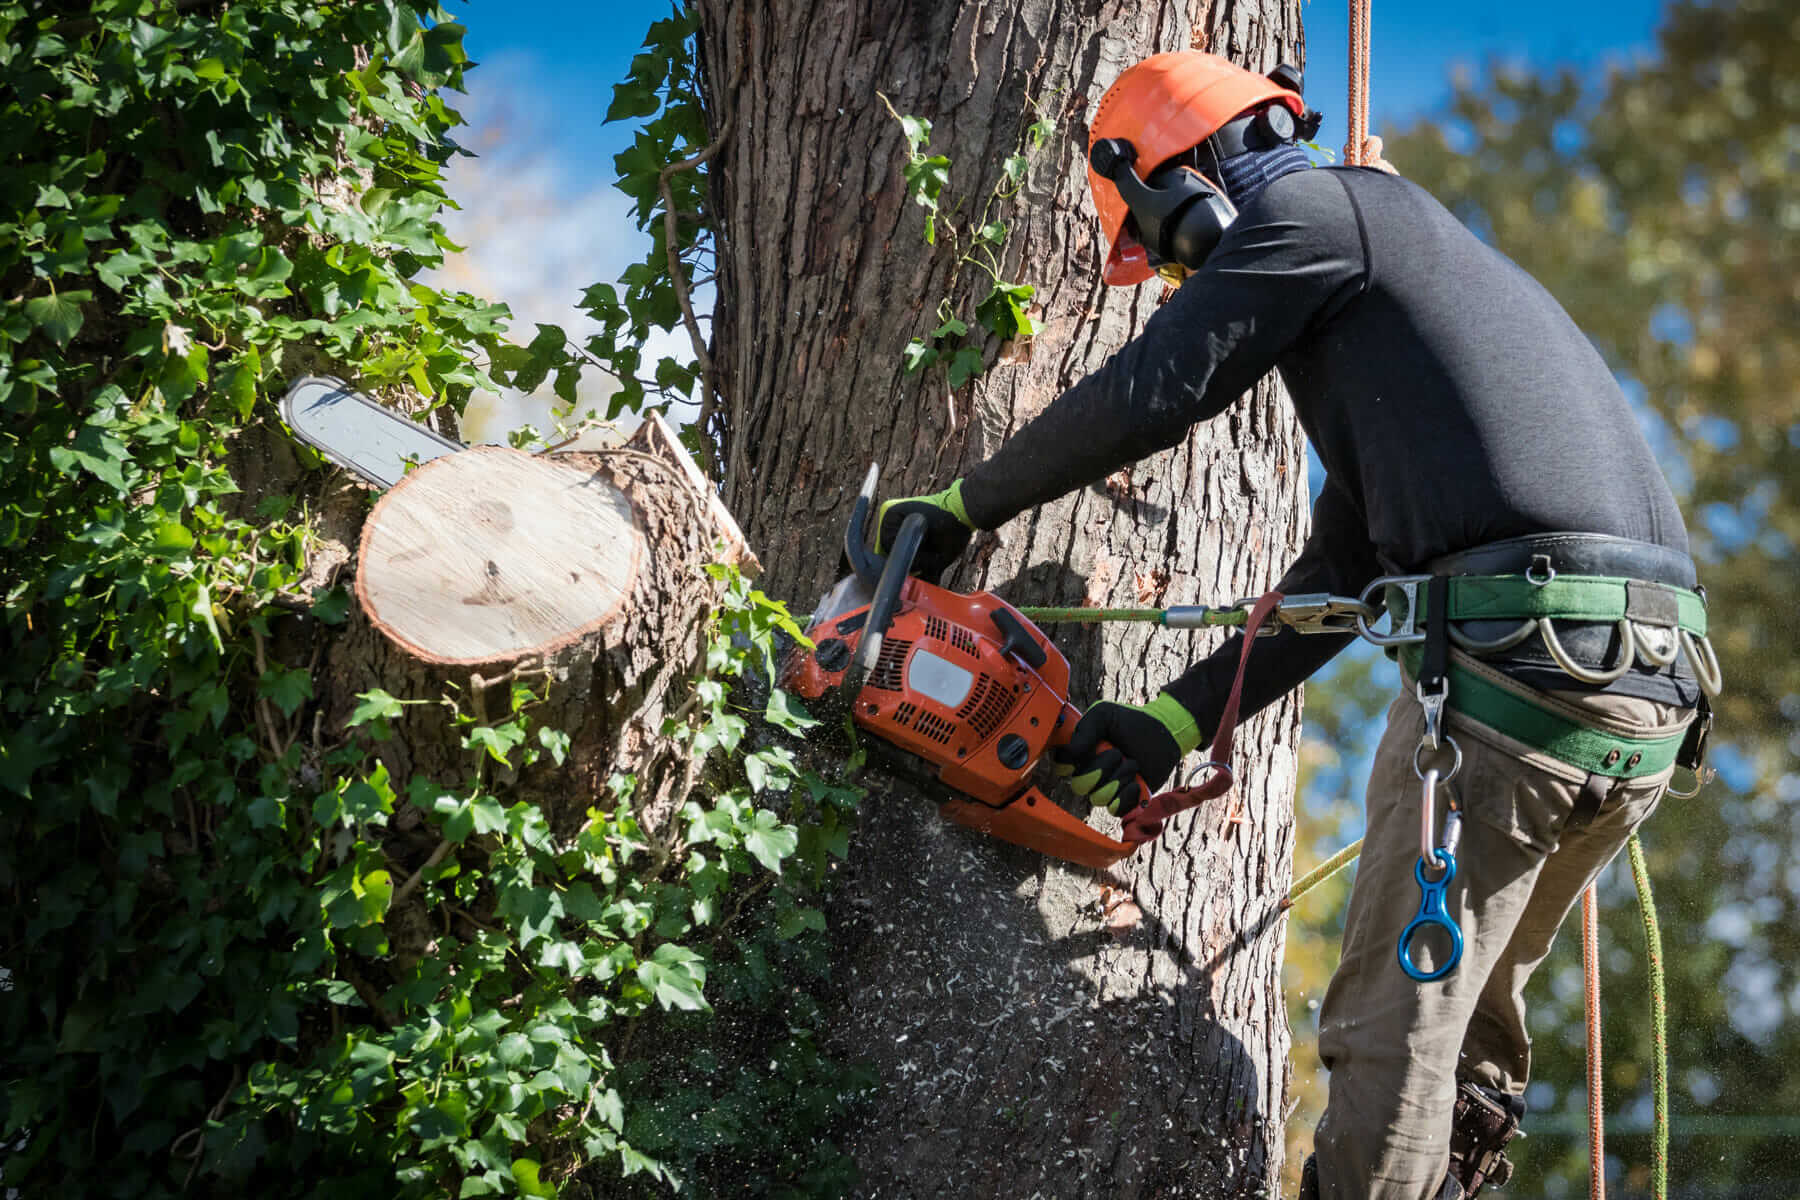 How to Find Reliable Tree Pruning Services Near Me